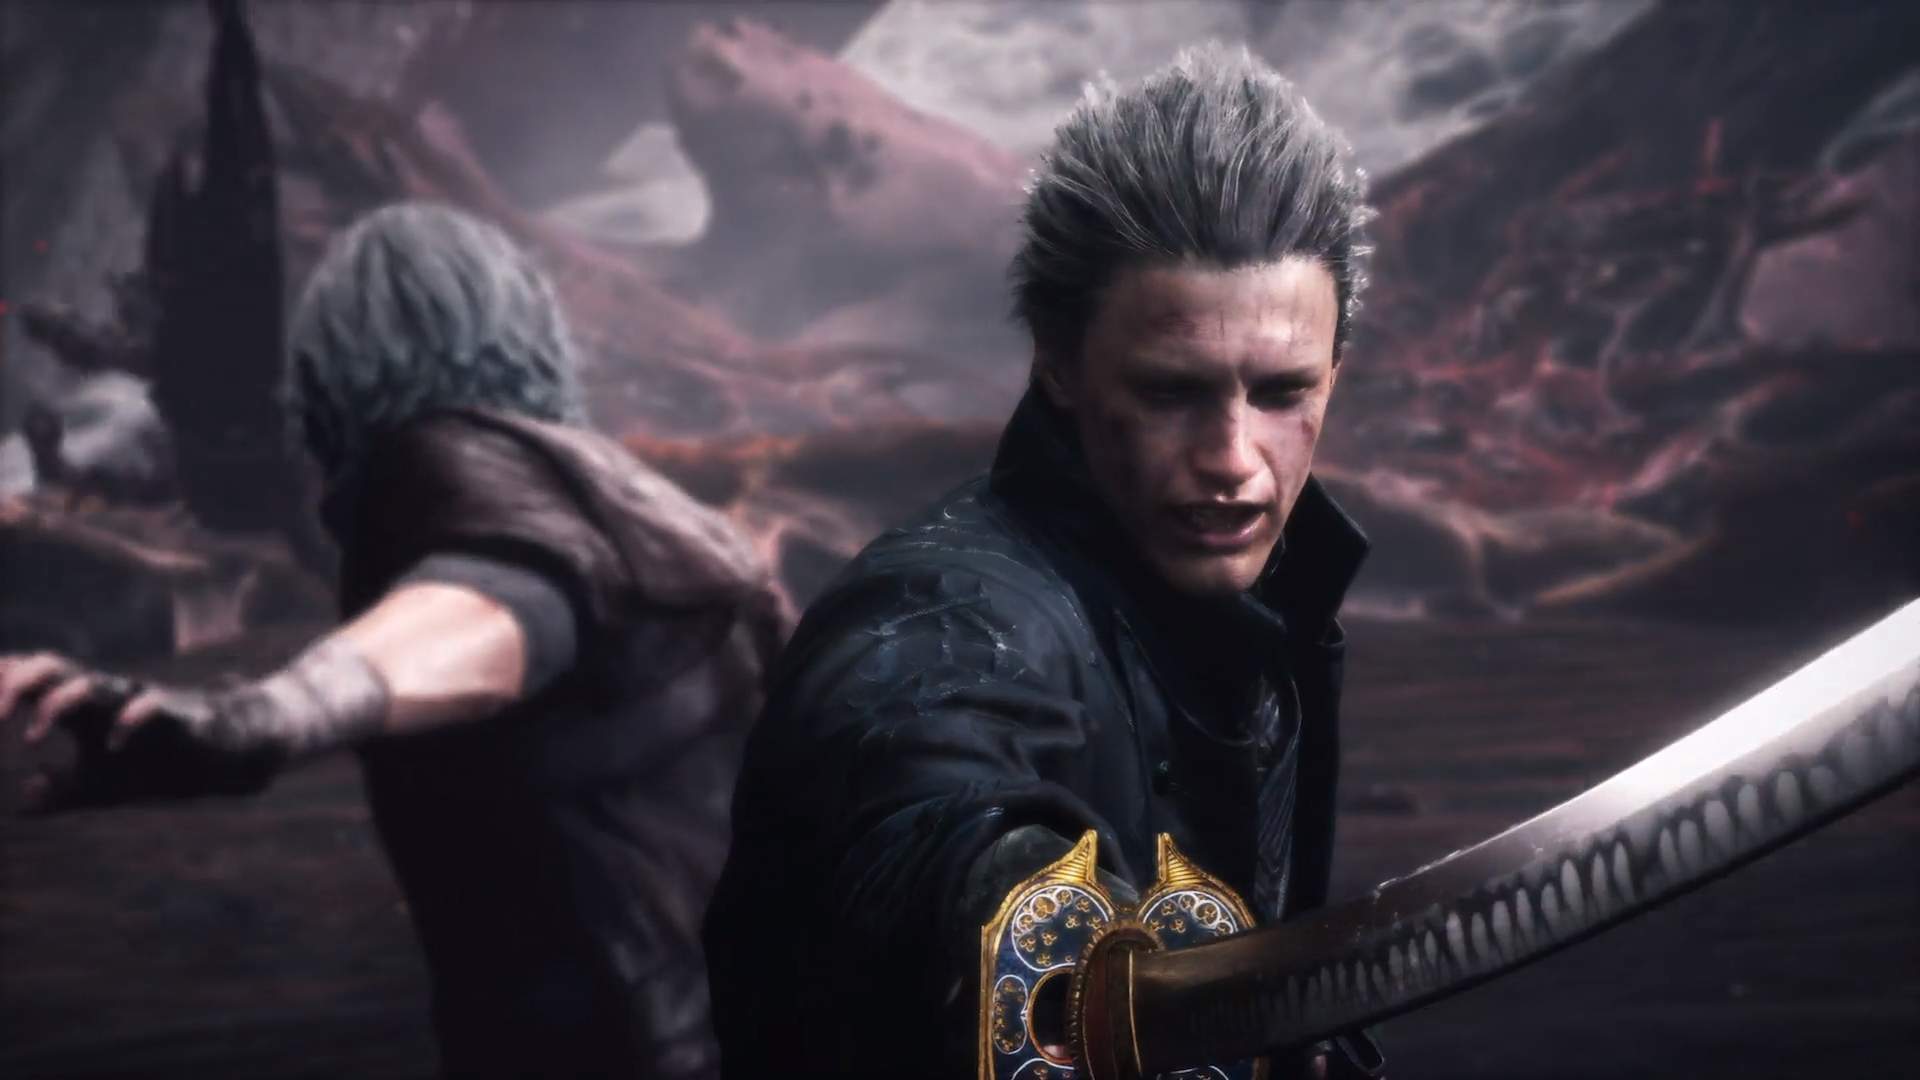 Devil May Cry 5 Special Edition Graphics Options Revealed - Rely on Horror